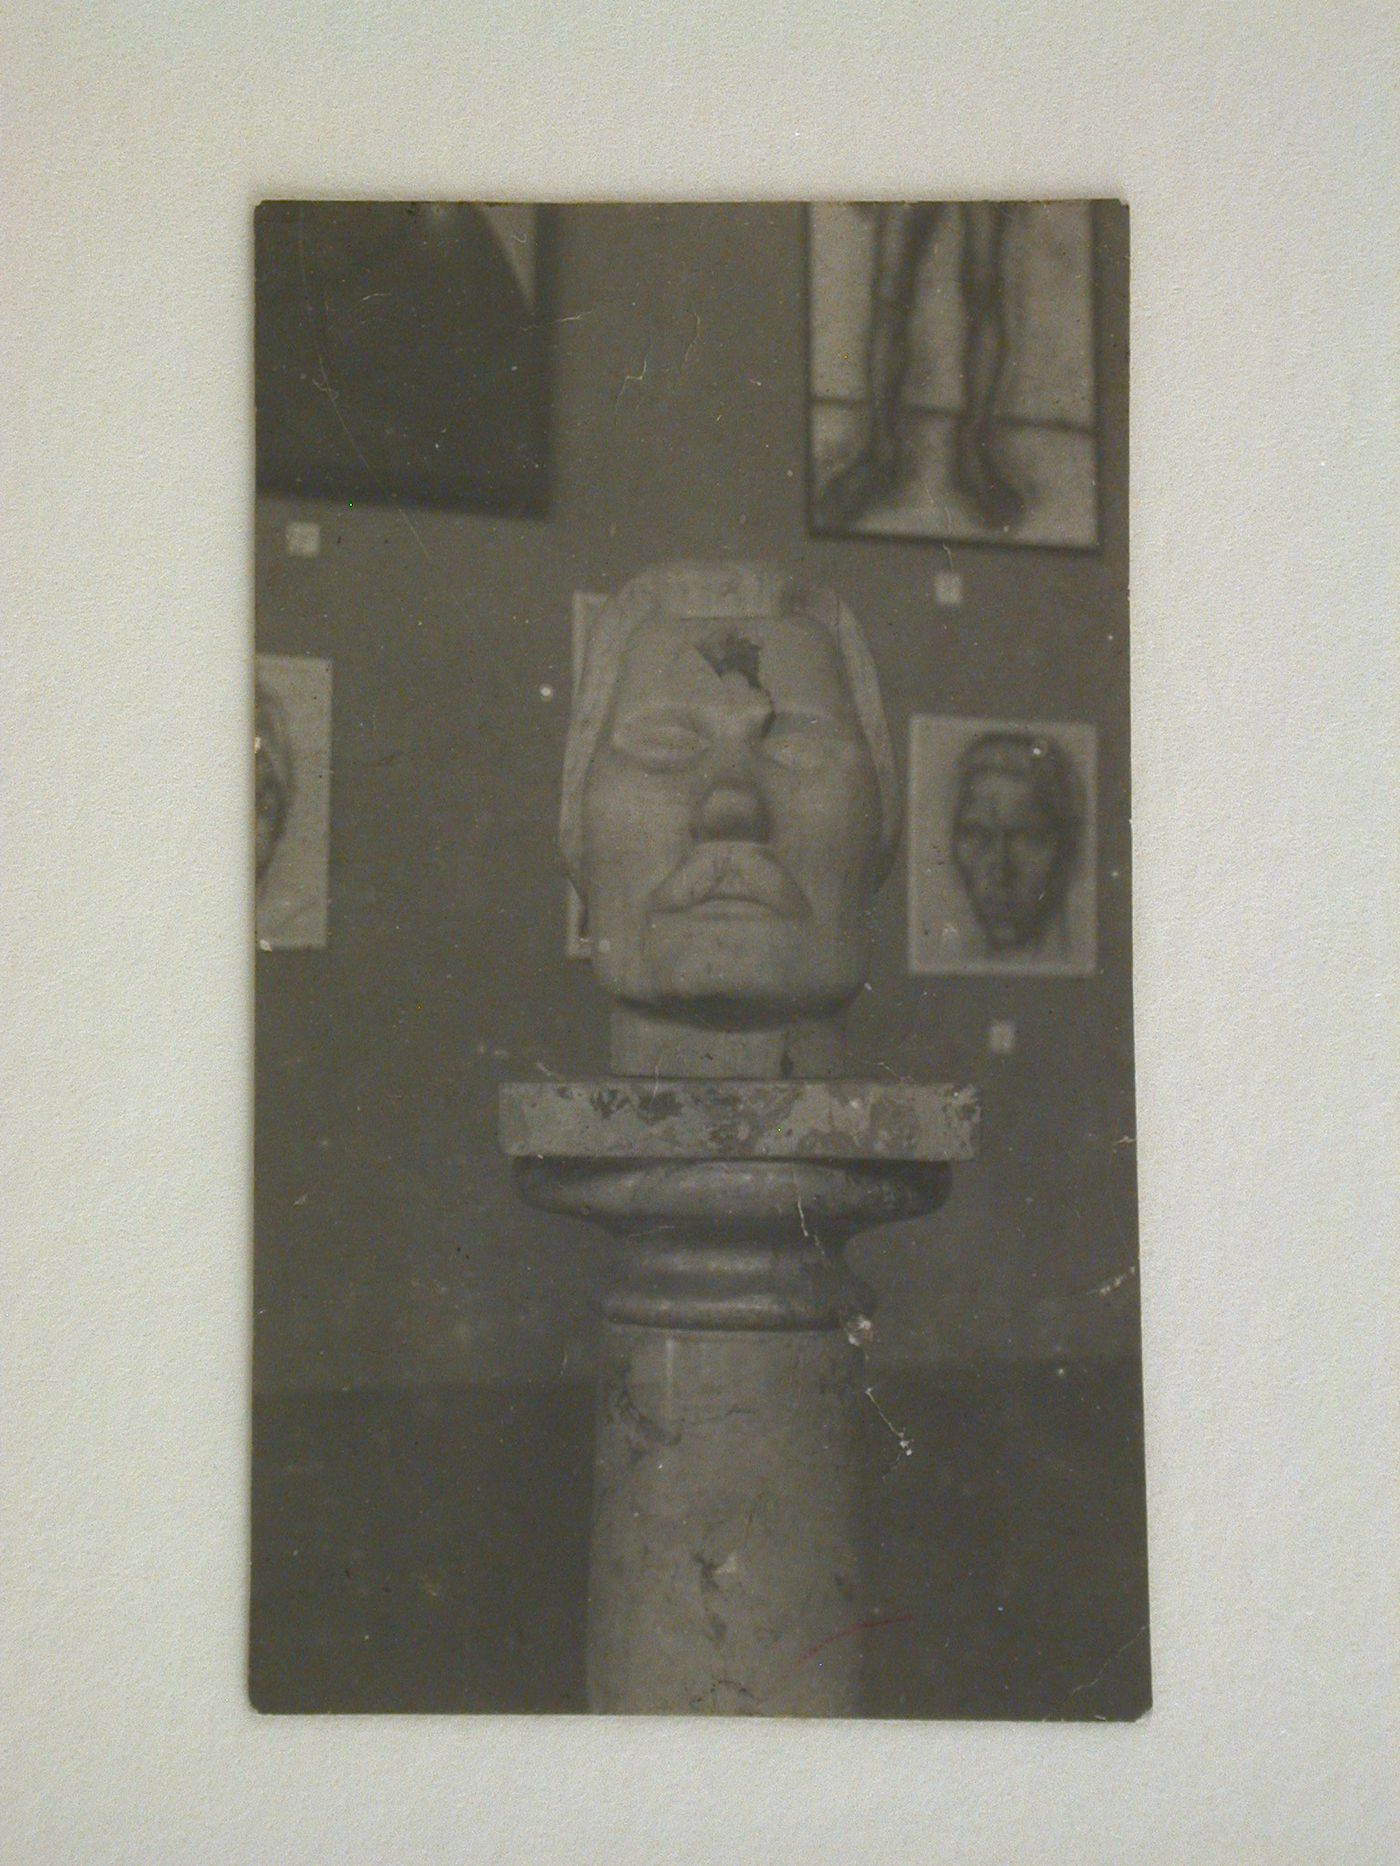 View of a sculpted head of Maxim Gorki with figure study drawings in the background, Soviet Union